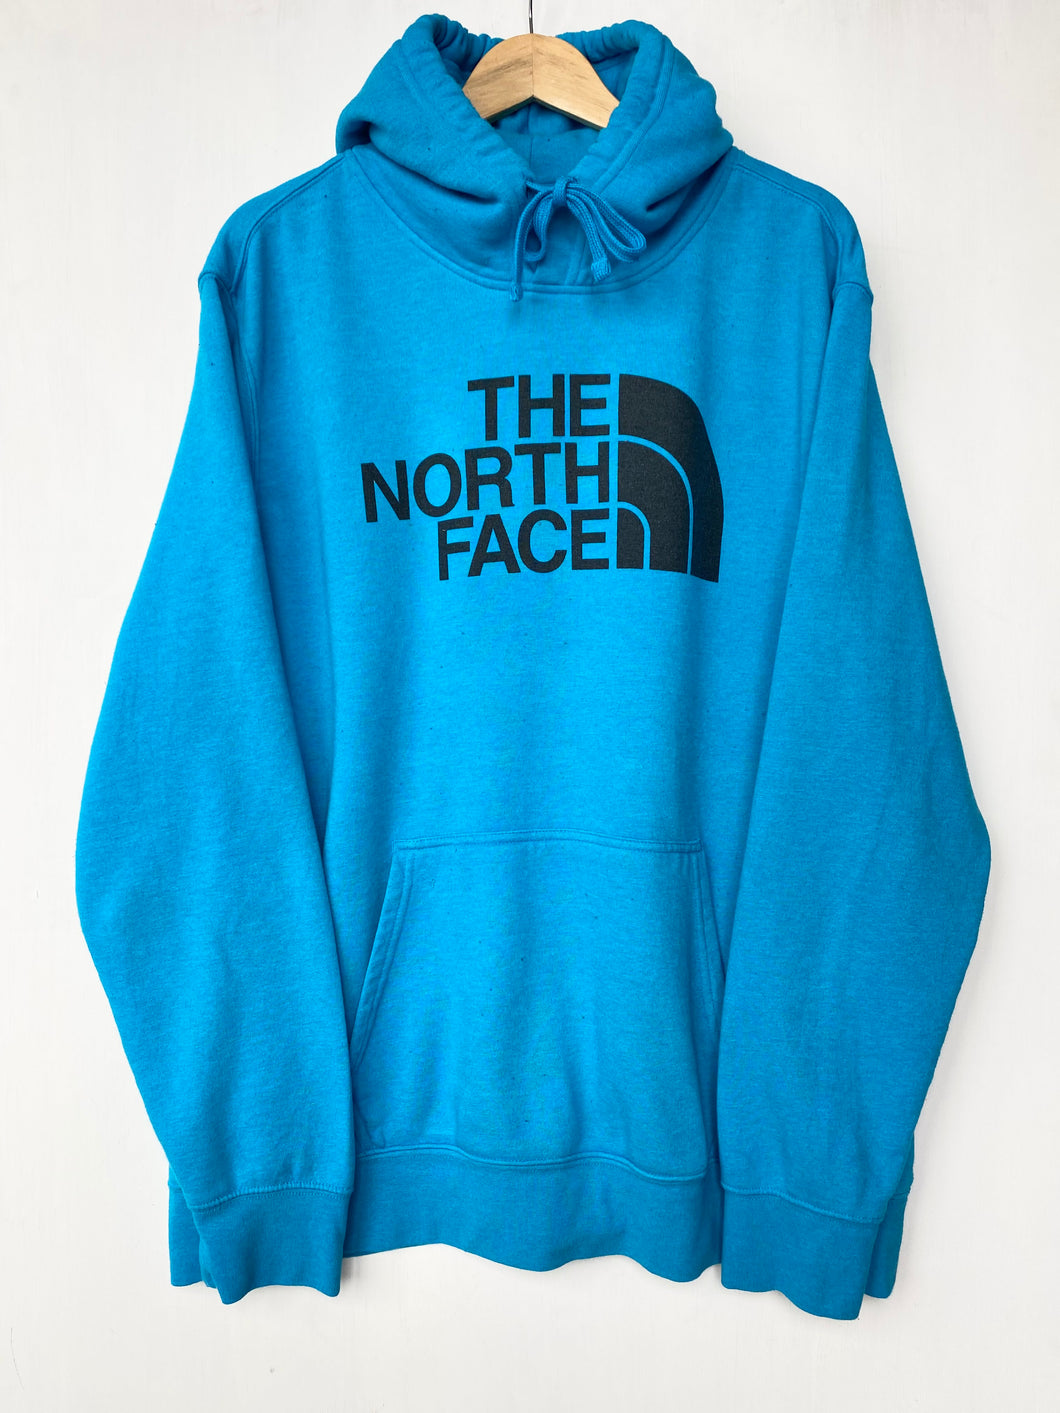 The North Face hoodie (2XL)